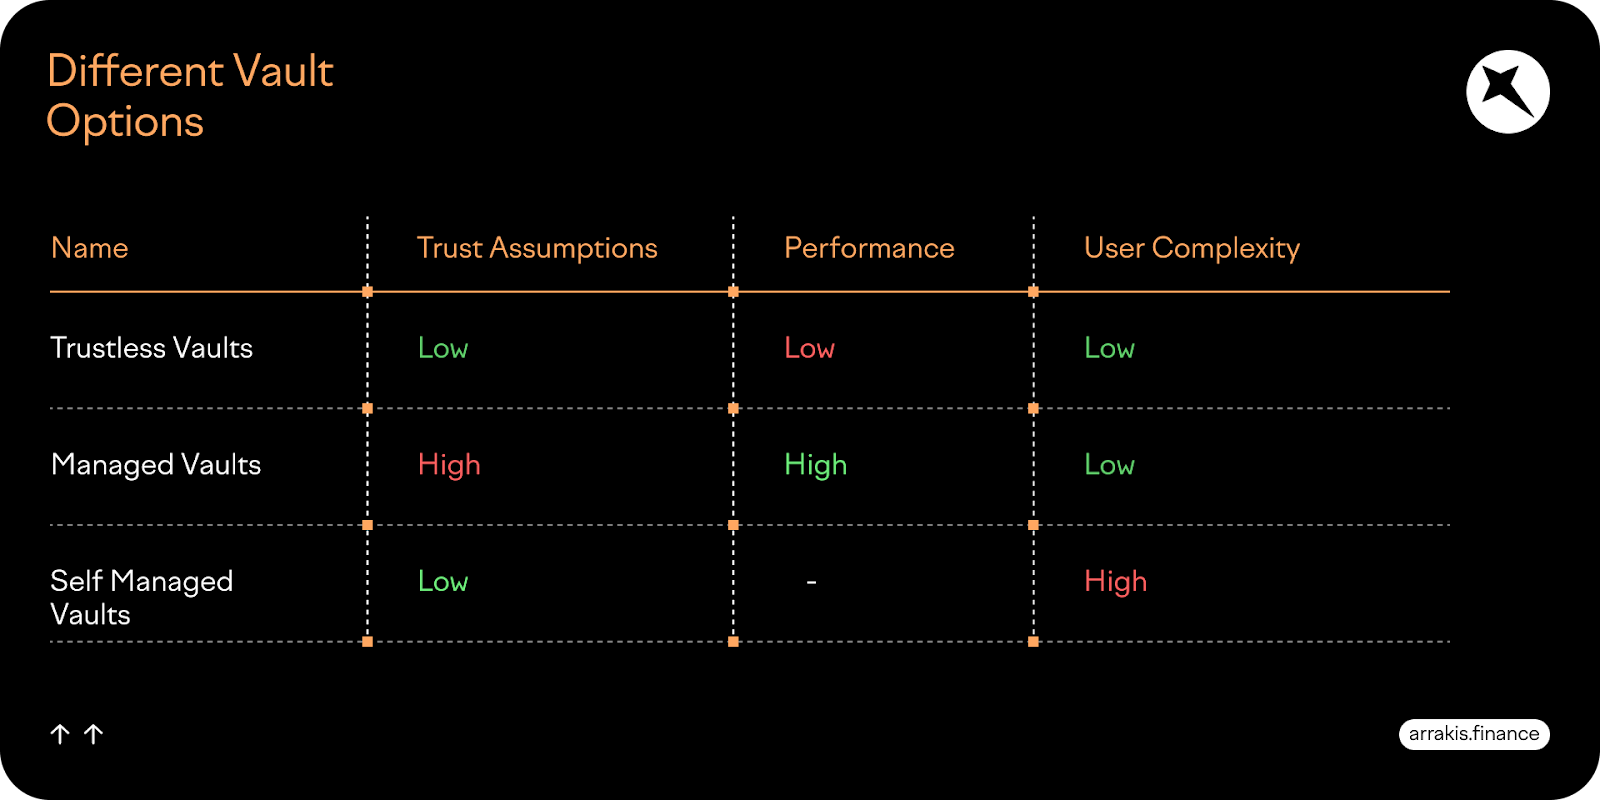 ’Trust’ refers to trusting the manager for the vault performance, not for the safety of the assets themselves, since Arrakis and DeFi Edge are both non-custodial, and both are safe in this sense